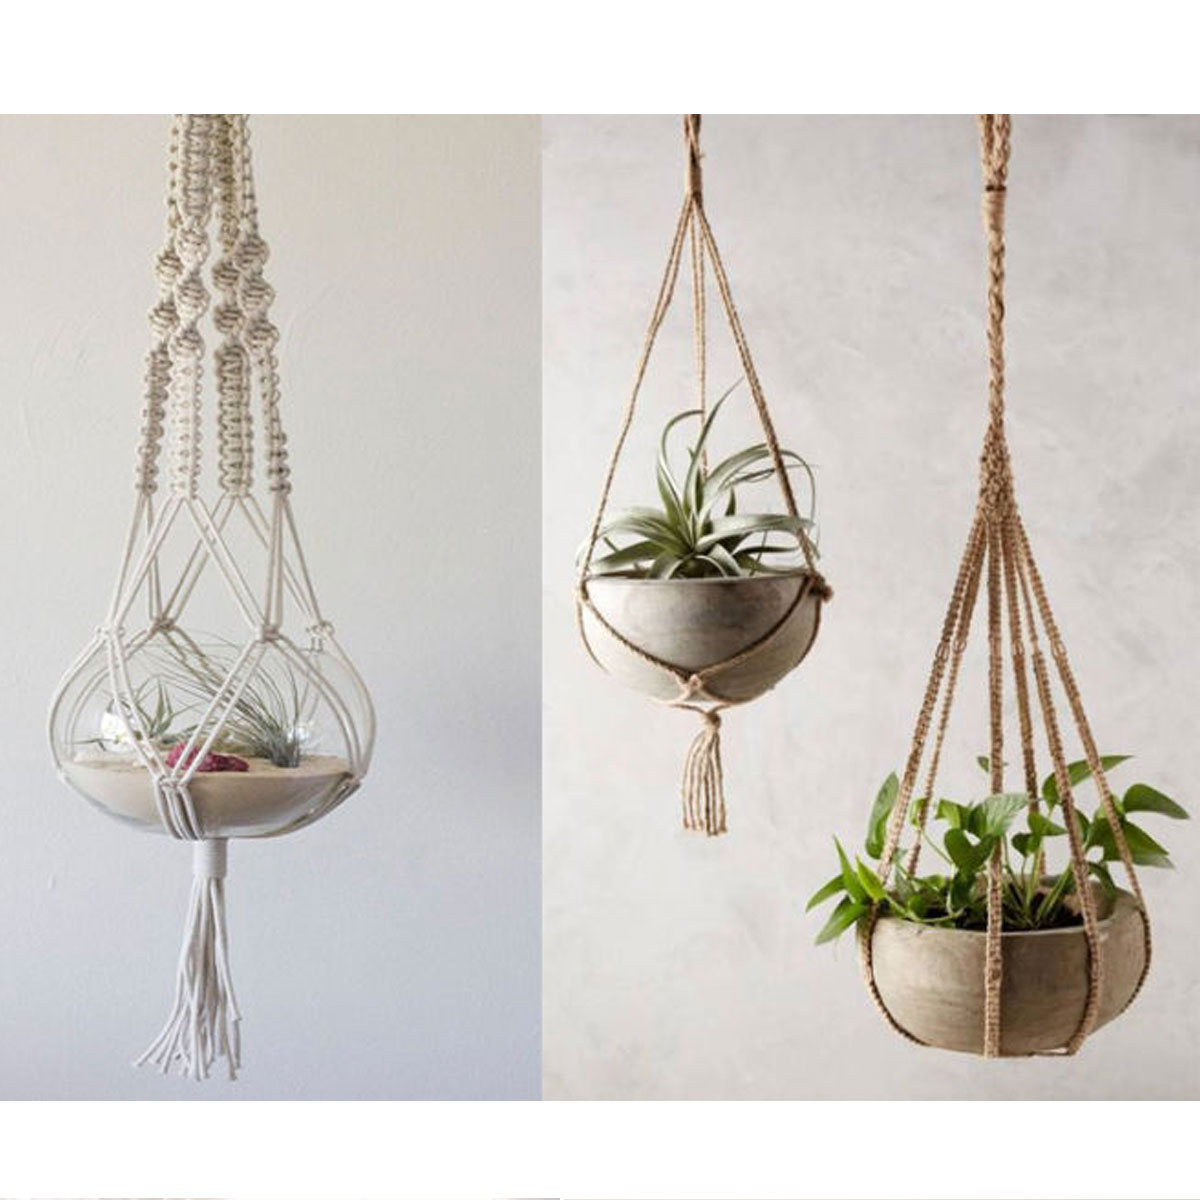 8-Strands-Braided-Wire-Natural-Cotton-Flower-Pot-Holder-Hanging-Rope-Twisted-Cord-DIY-Macrame-String-1363533-2